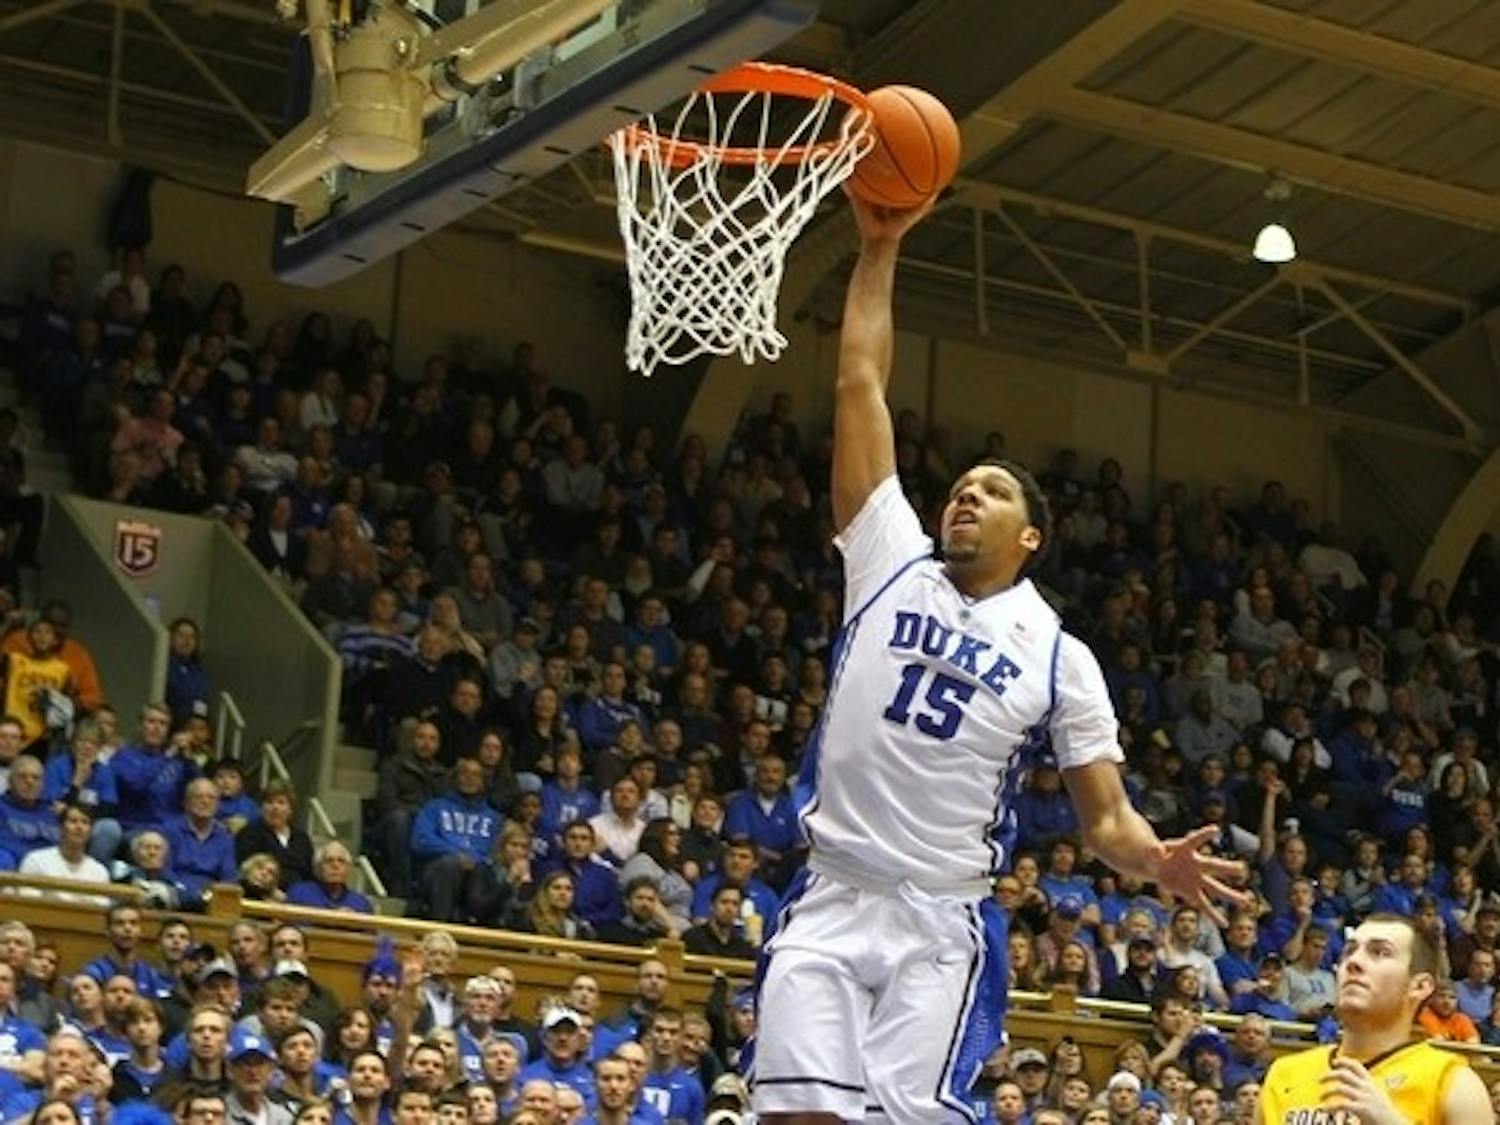 Jahlil Okafor is hoping to reach the same level of success in the NBA as he did at Duke.